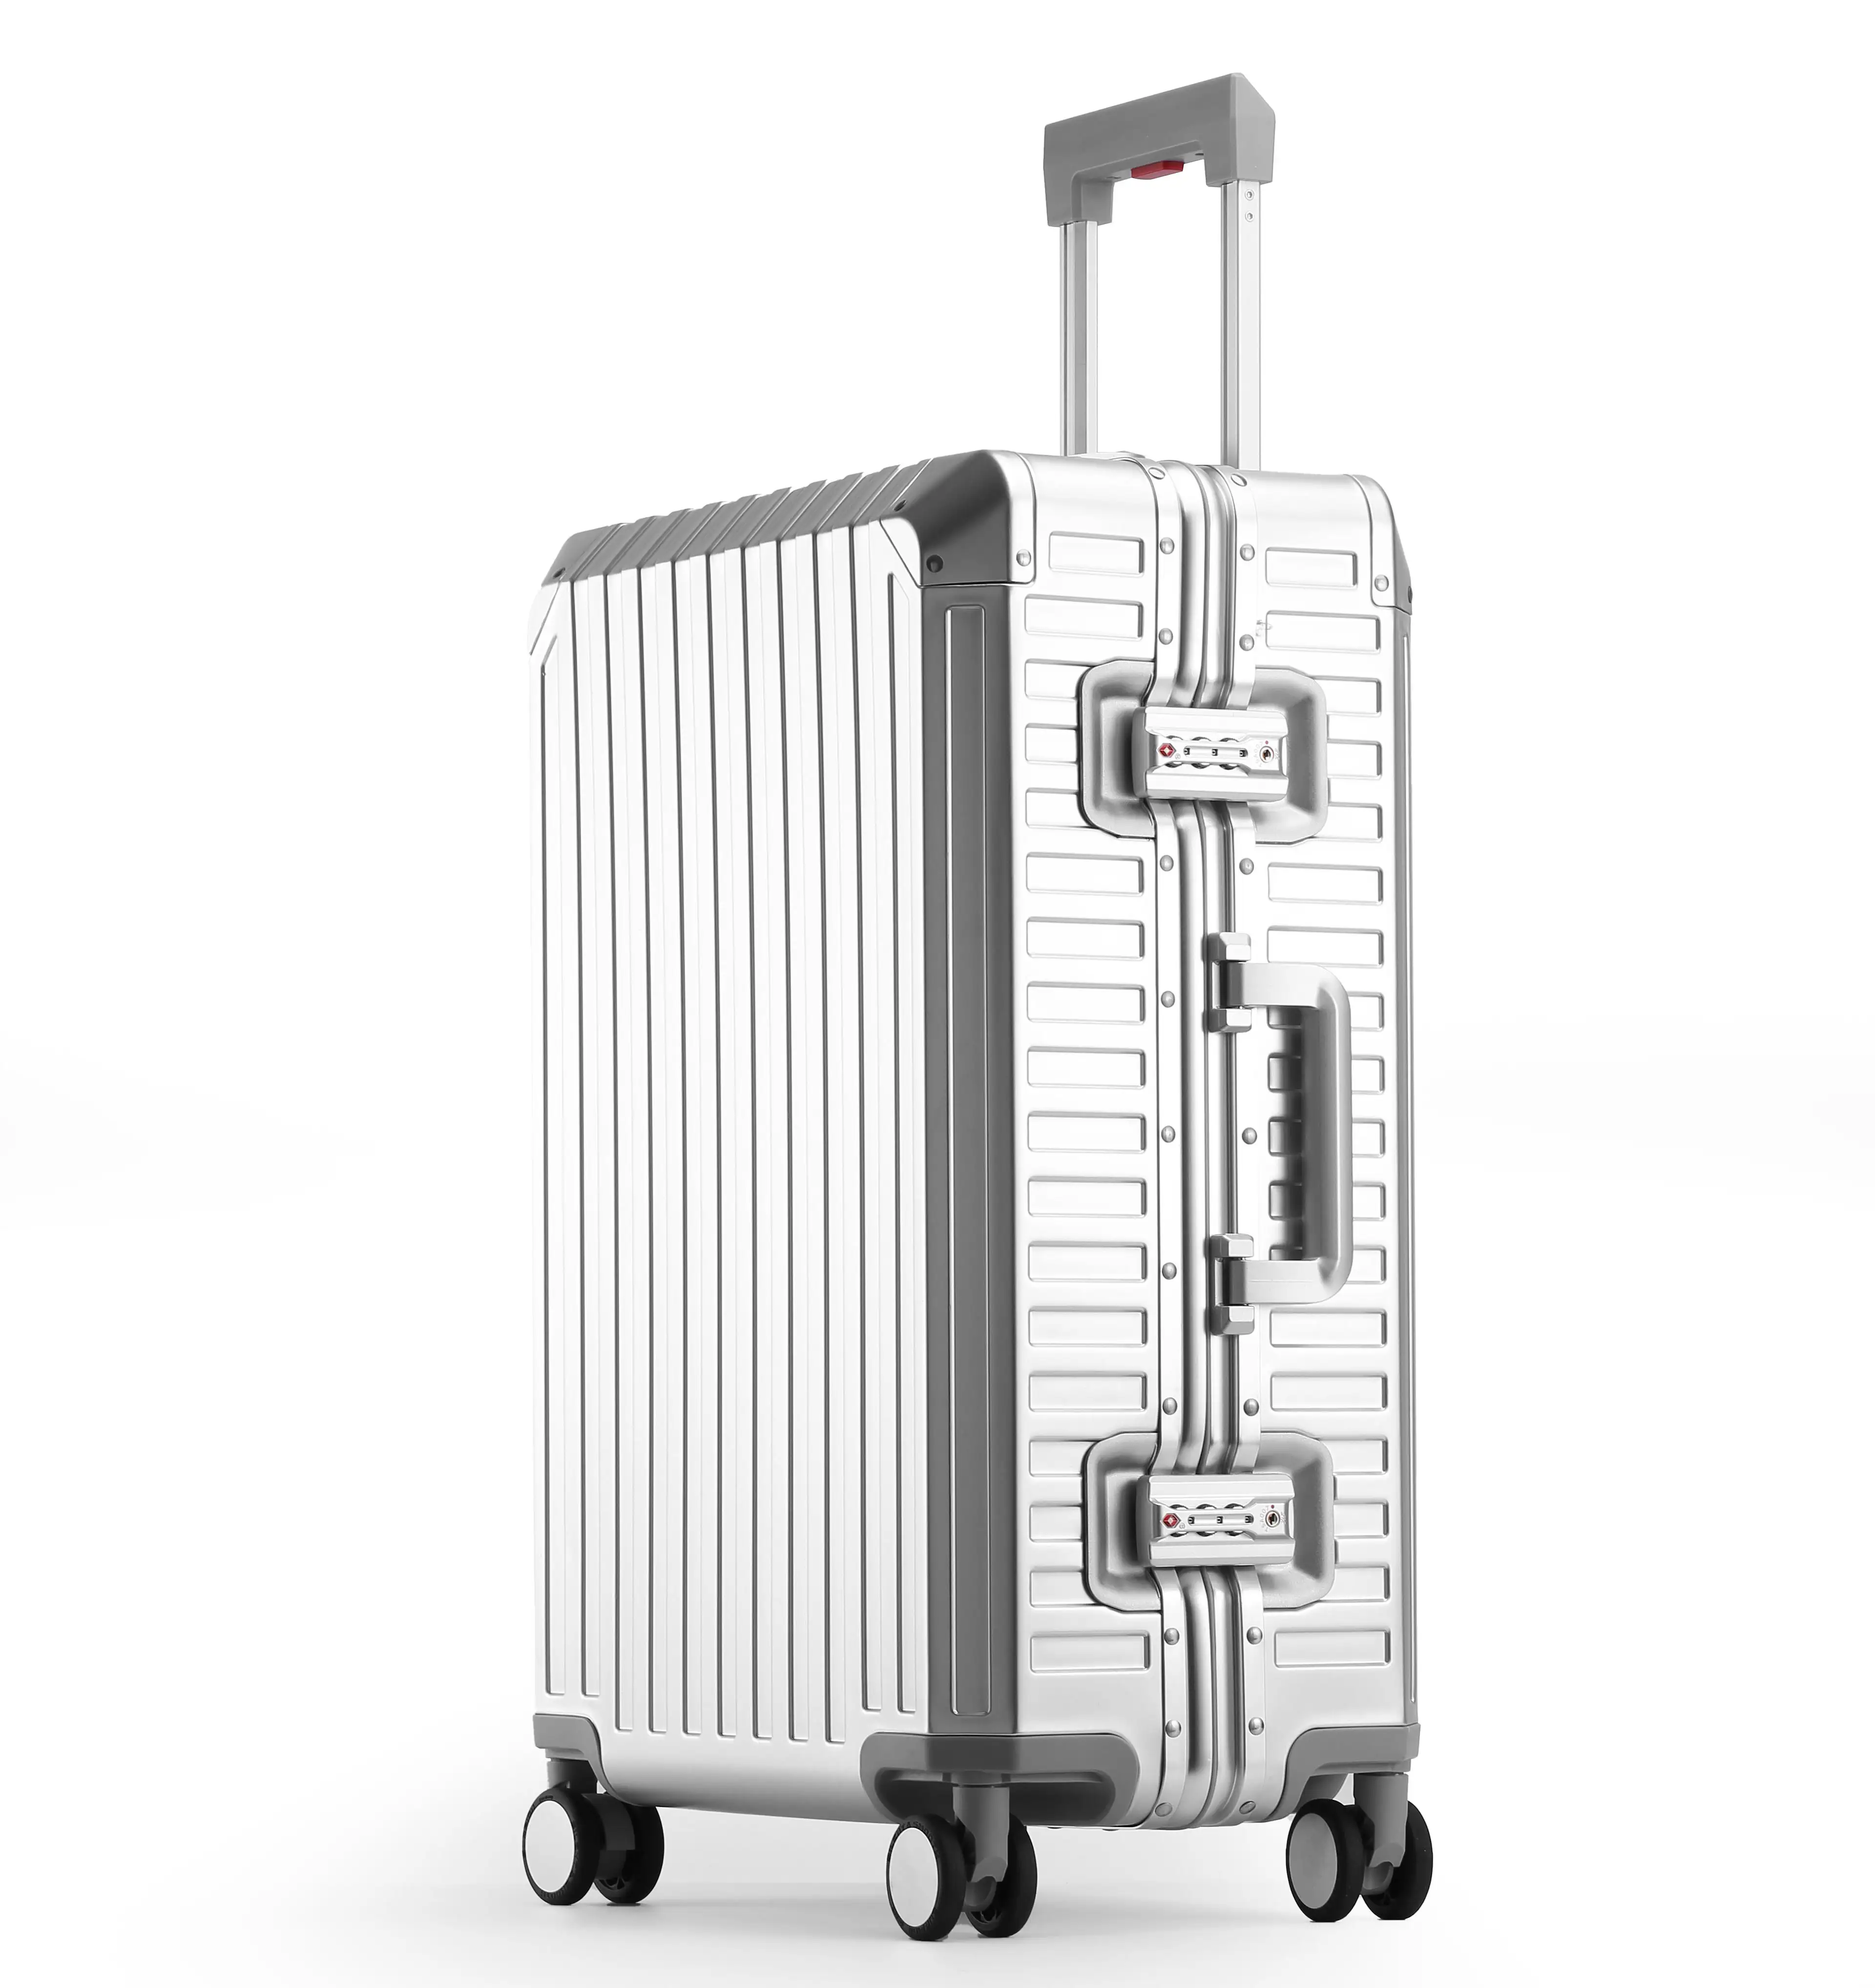 Top 5 Cabin Valise 2023 New Style All Aluminum Magnesiumalloy Luggage Carry On Luxury Suitcase With Laptop Pocket